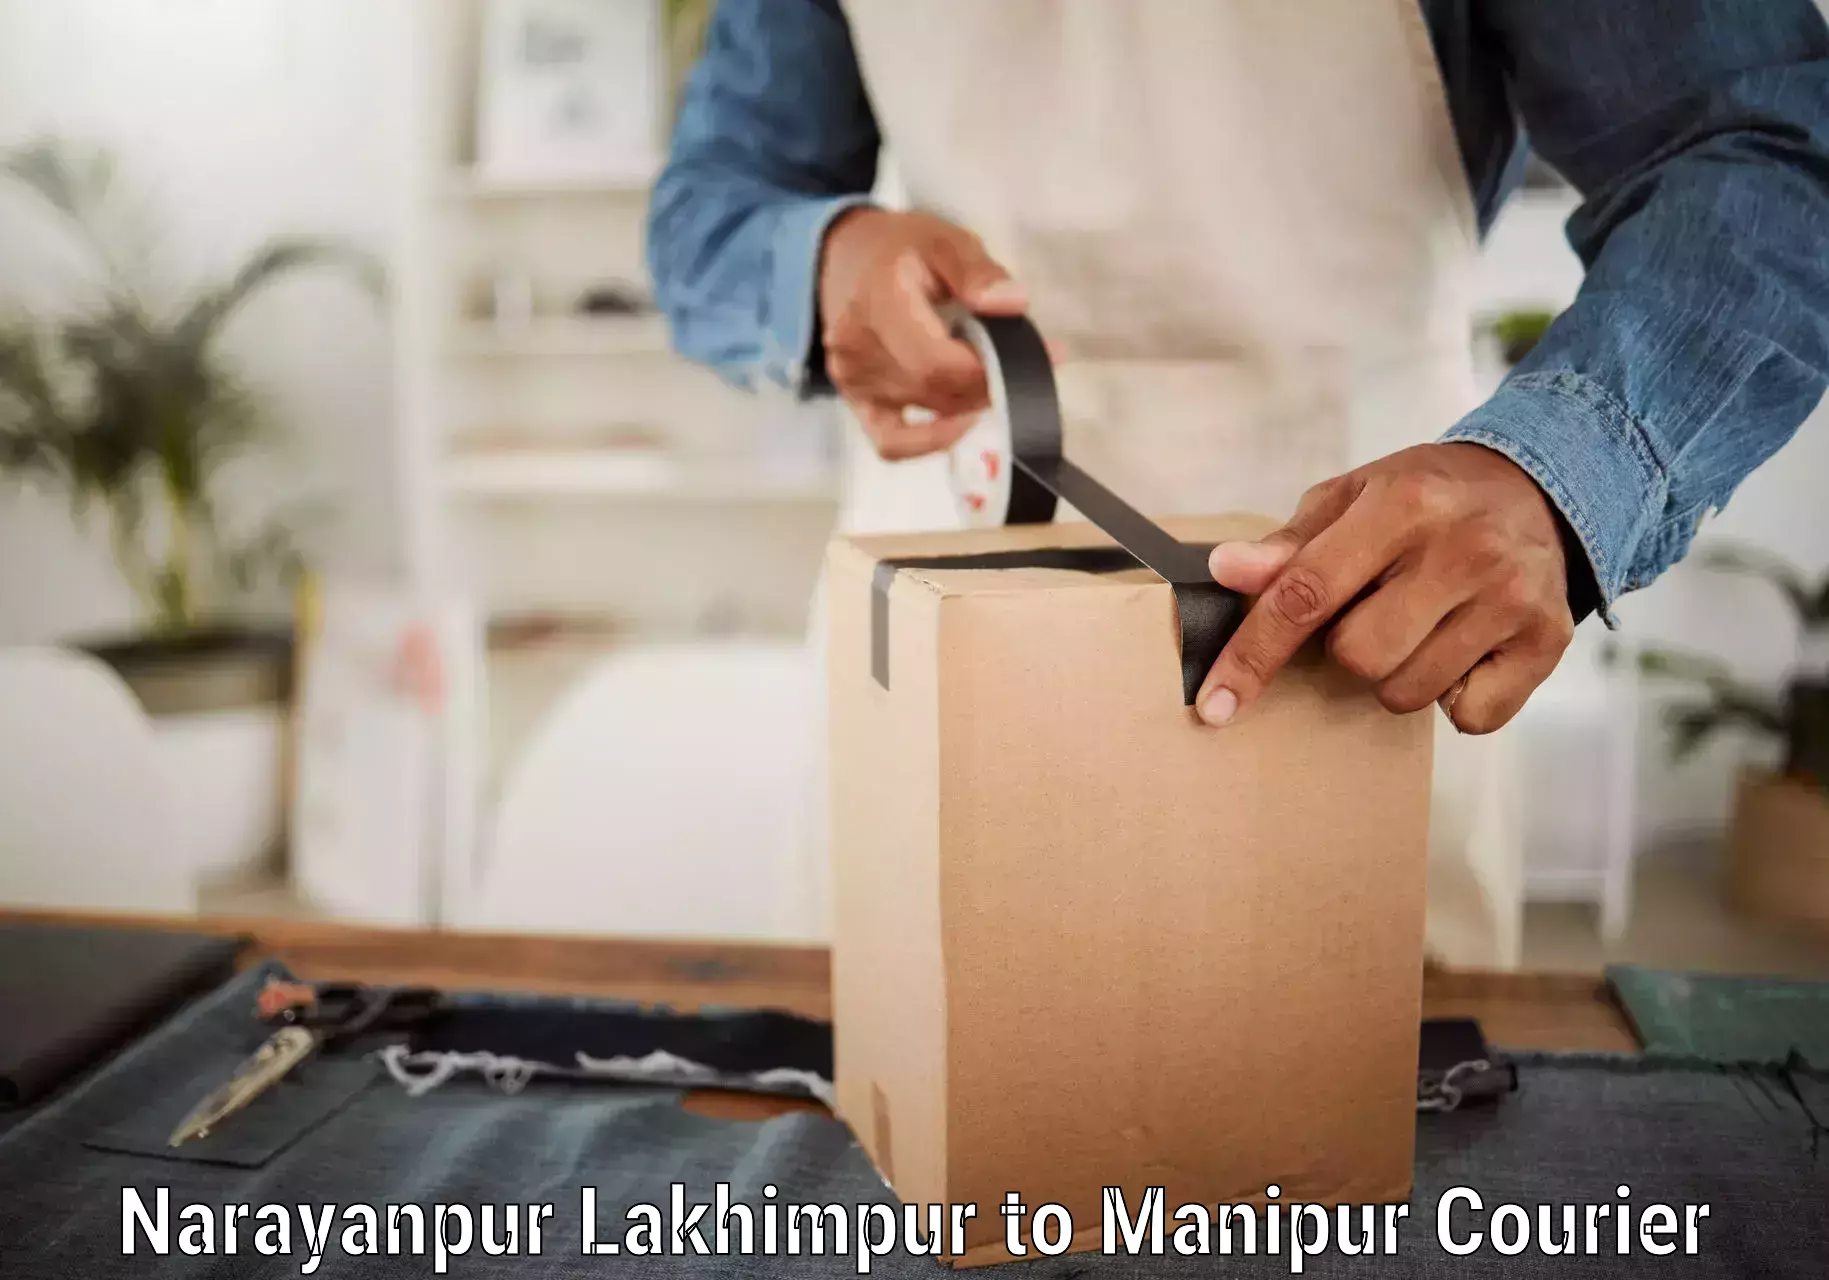 Reliable courier service Narayanpur Lakhimpur to Kakching